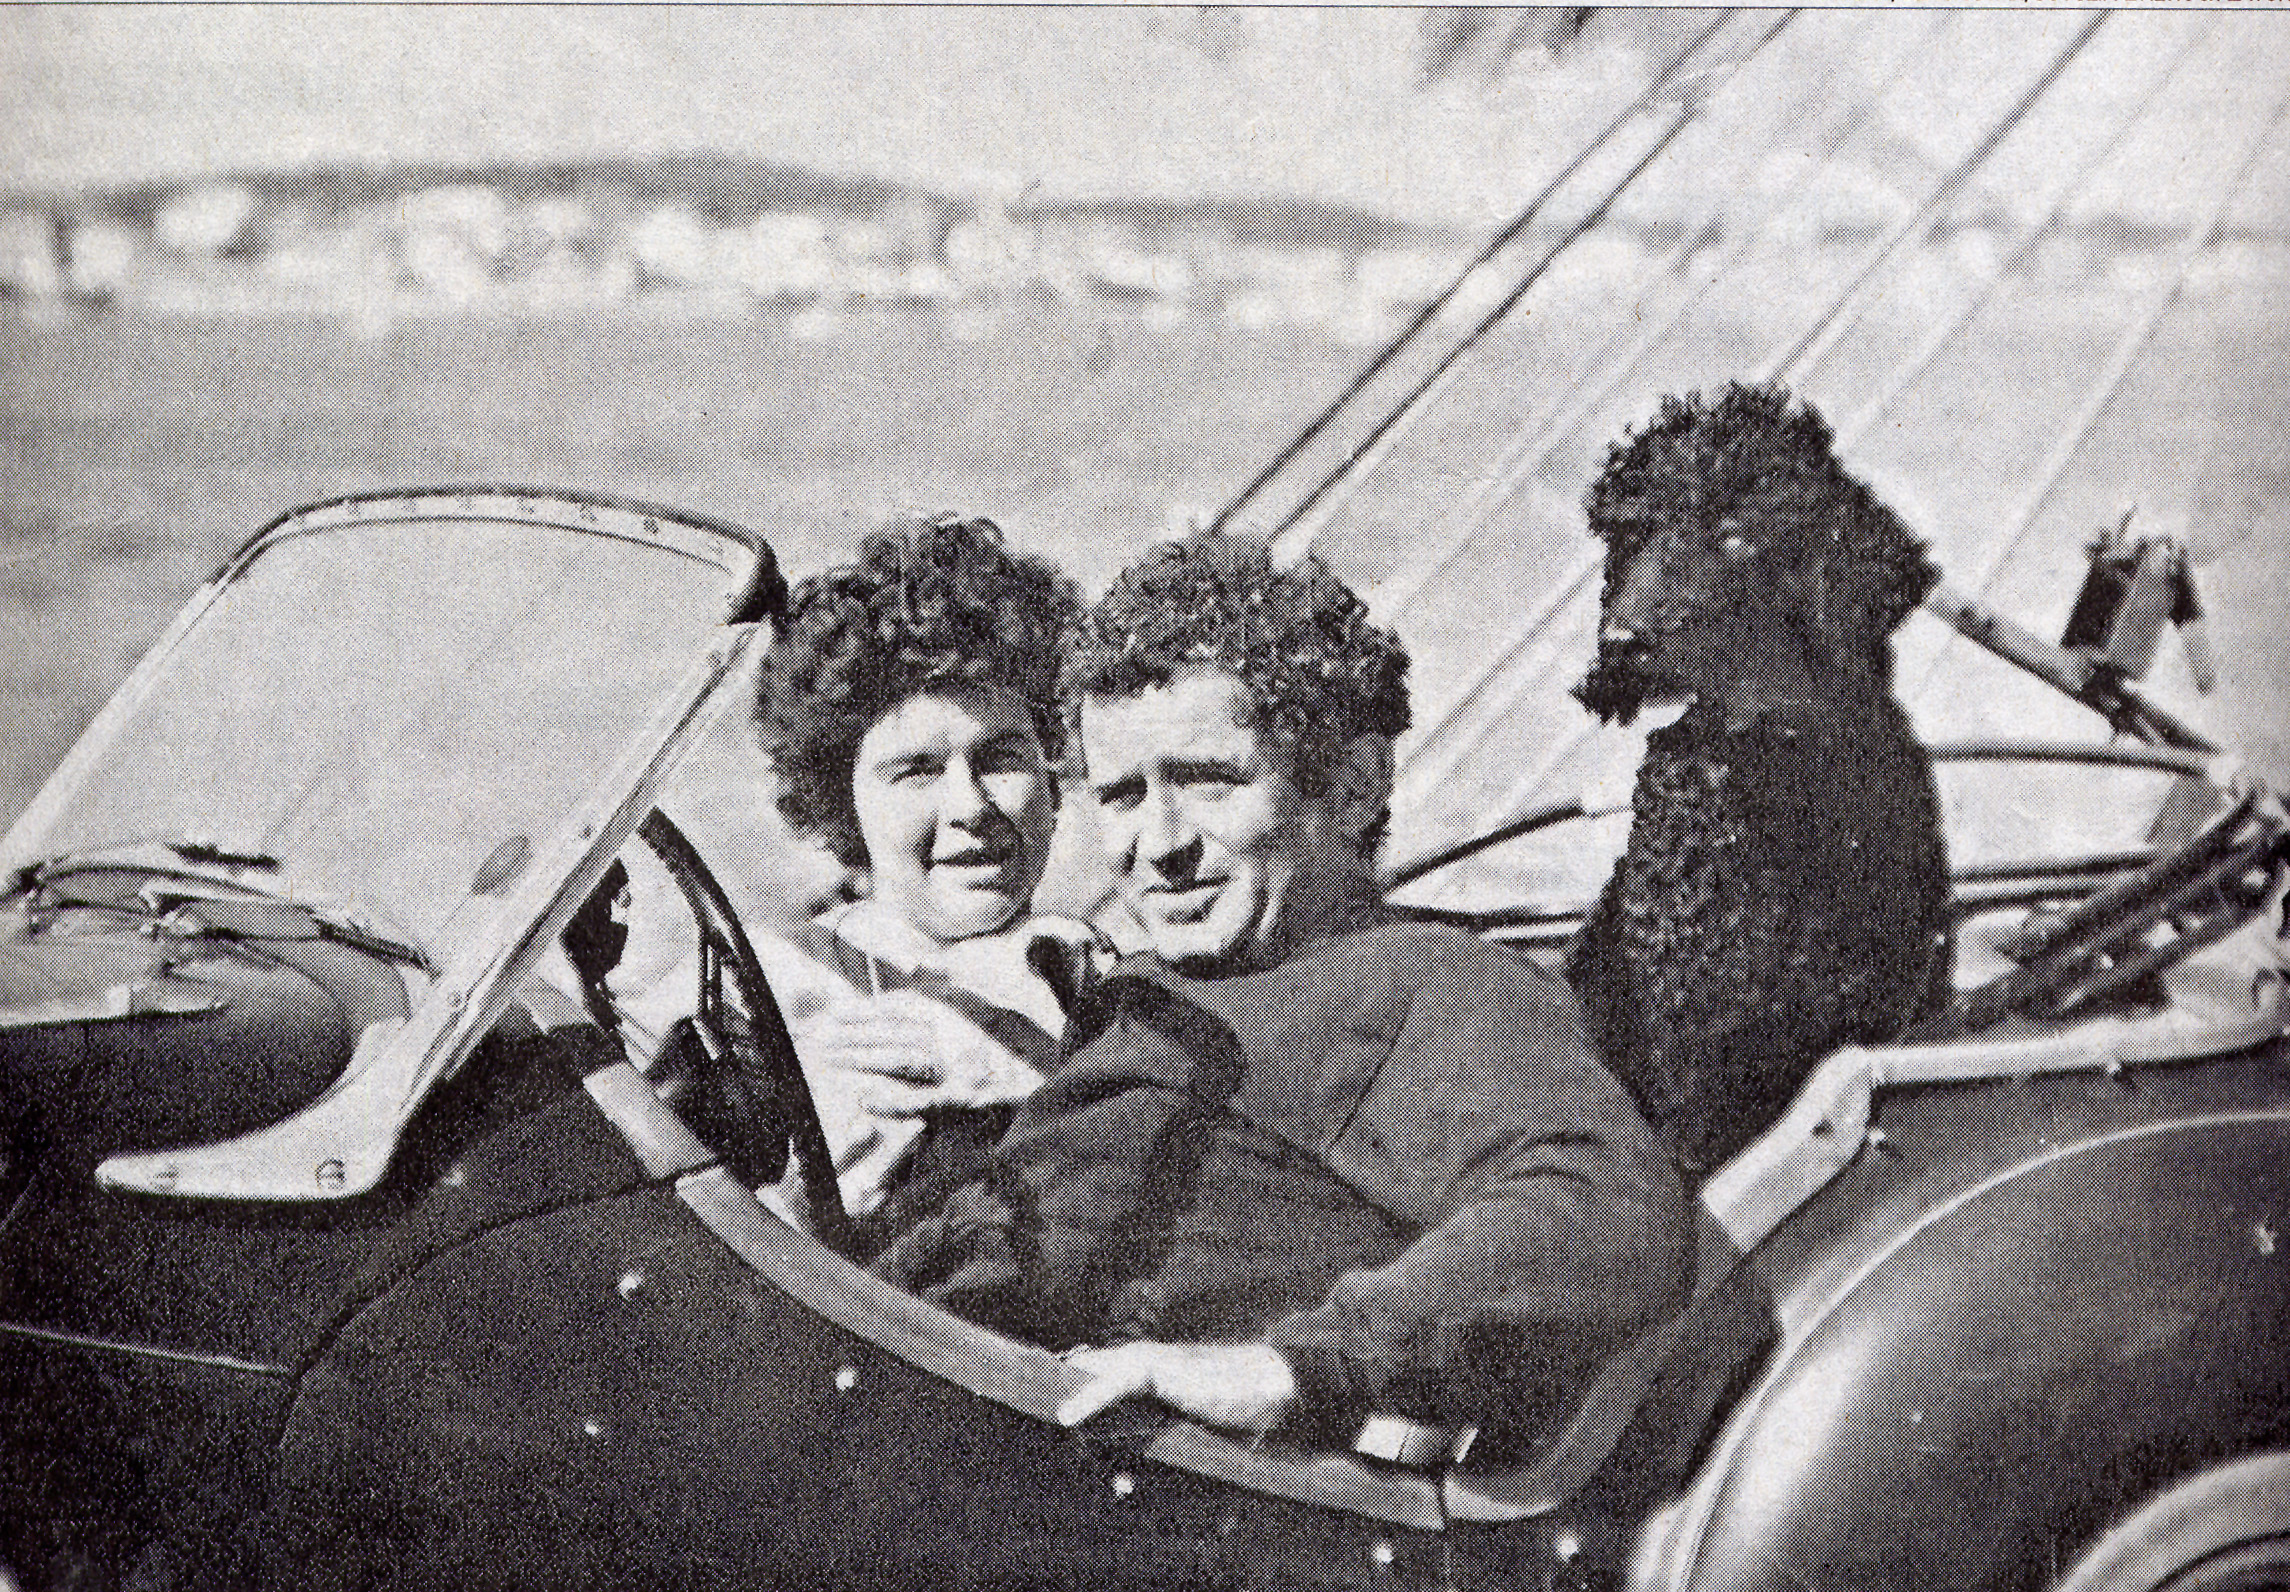 Lady-Jeanne-Photo-of-Lady-Jeanne-Campbell-with-Norman-Mailer-and Black-Poodle-in-Roadster